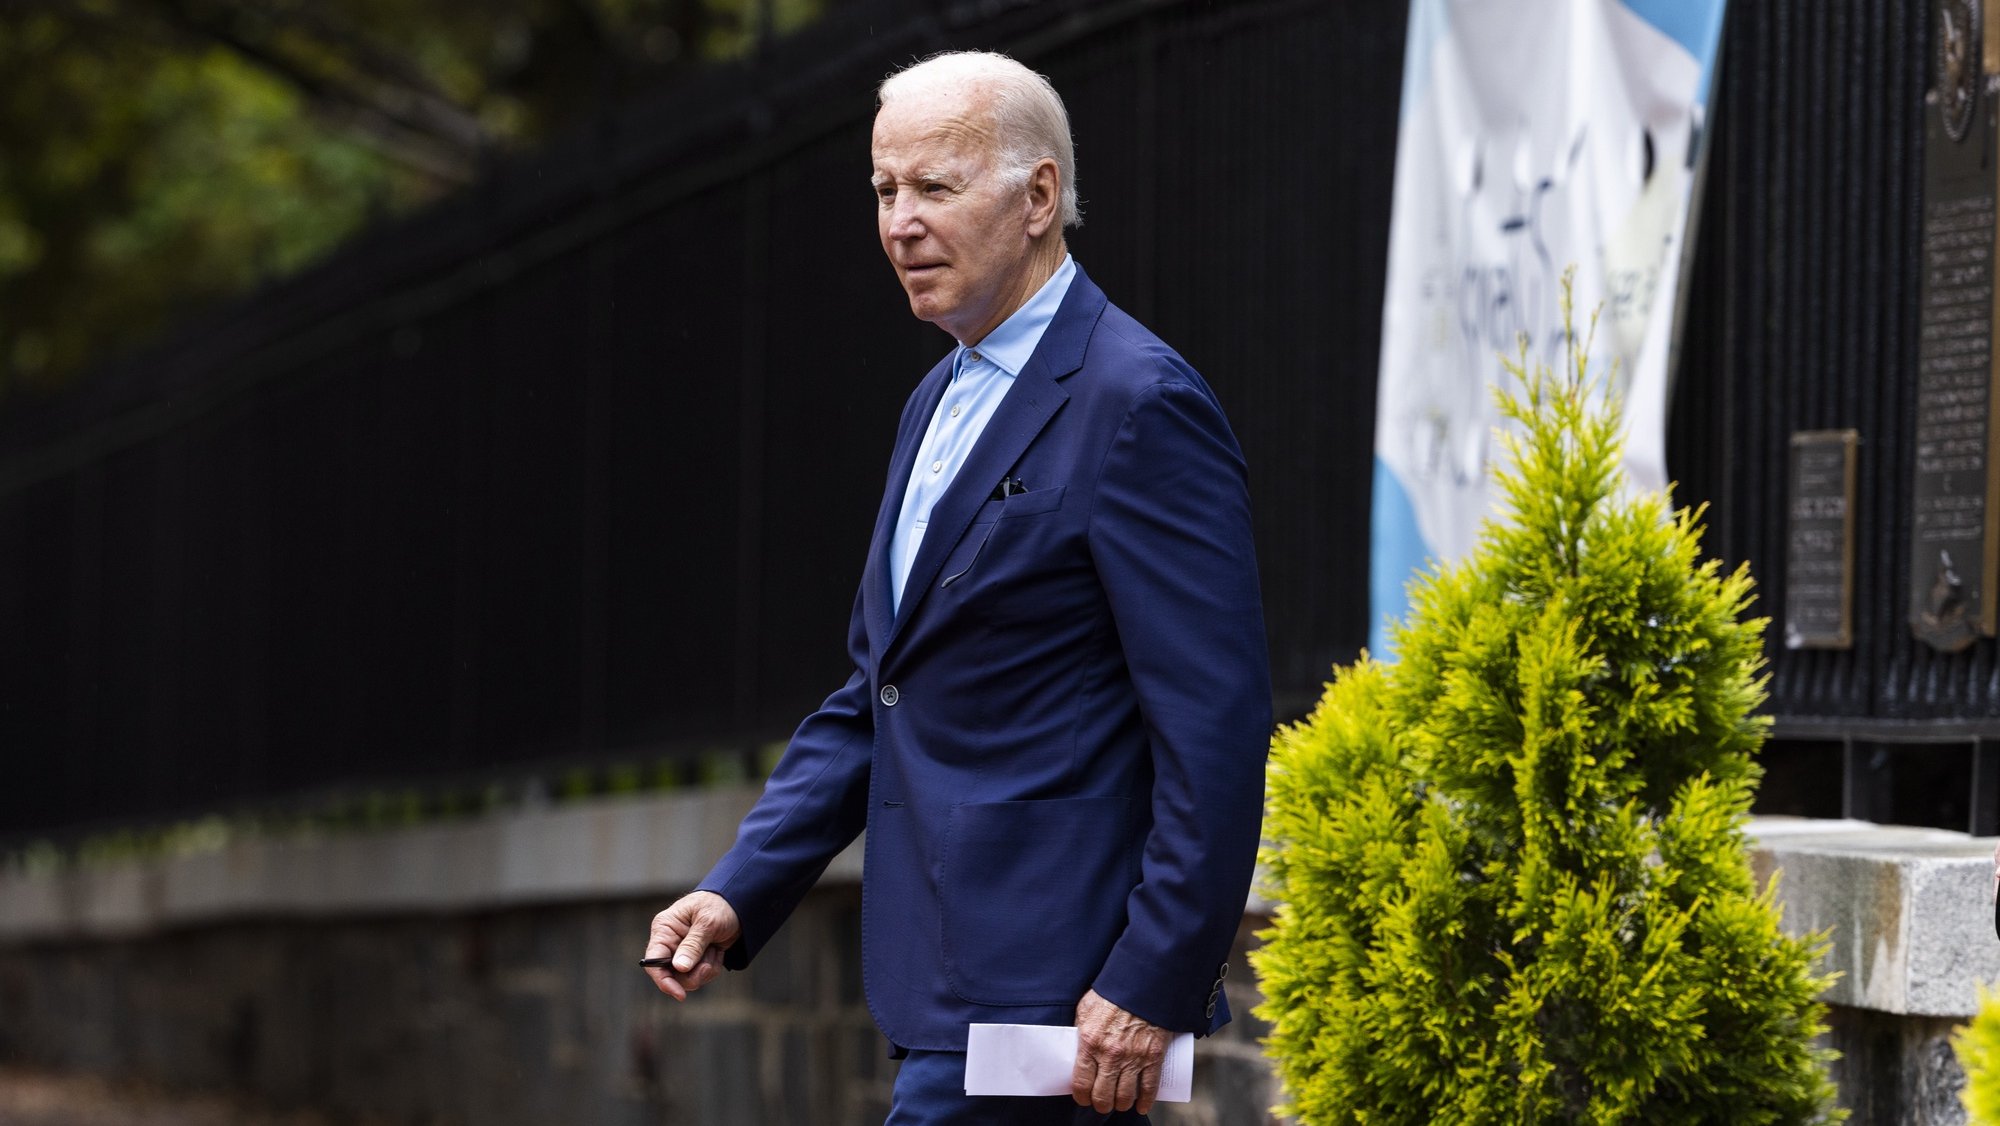 epa10076848 US President Joe Biden departs after attending Holy Trinity Catholic Church in Georgetown the day after his return from the Middle East in Washington, DC, USA, 17 July 2022.  EPA/JIM LO SCALZO / POOL